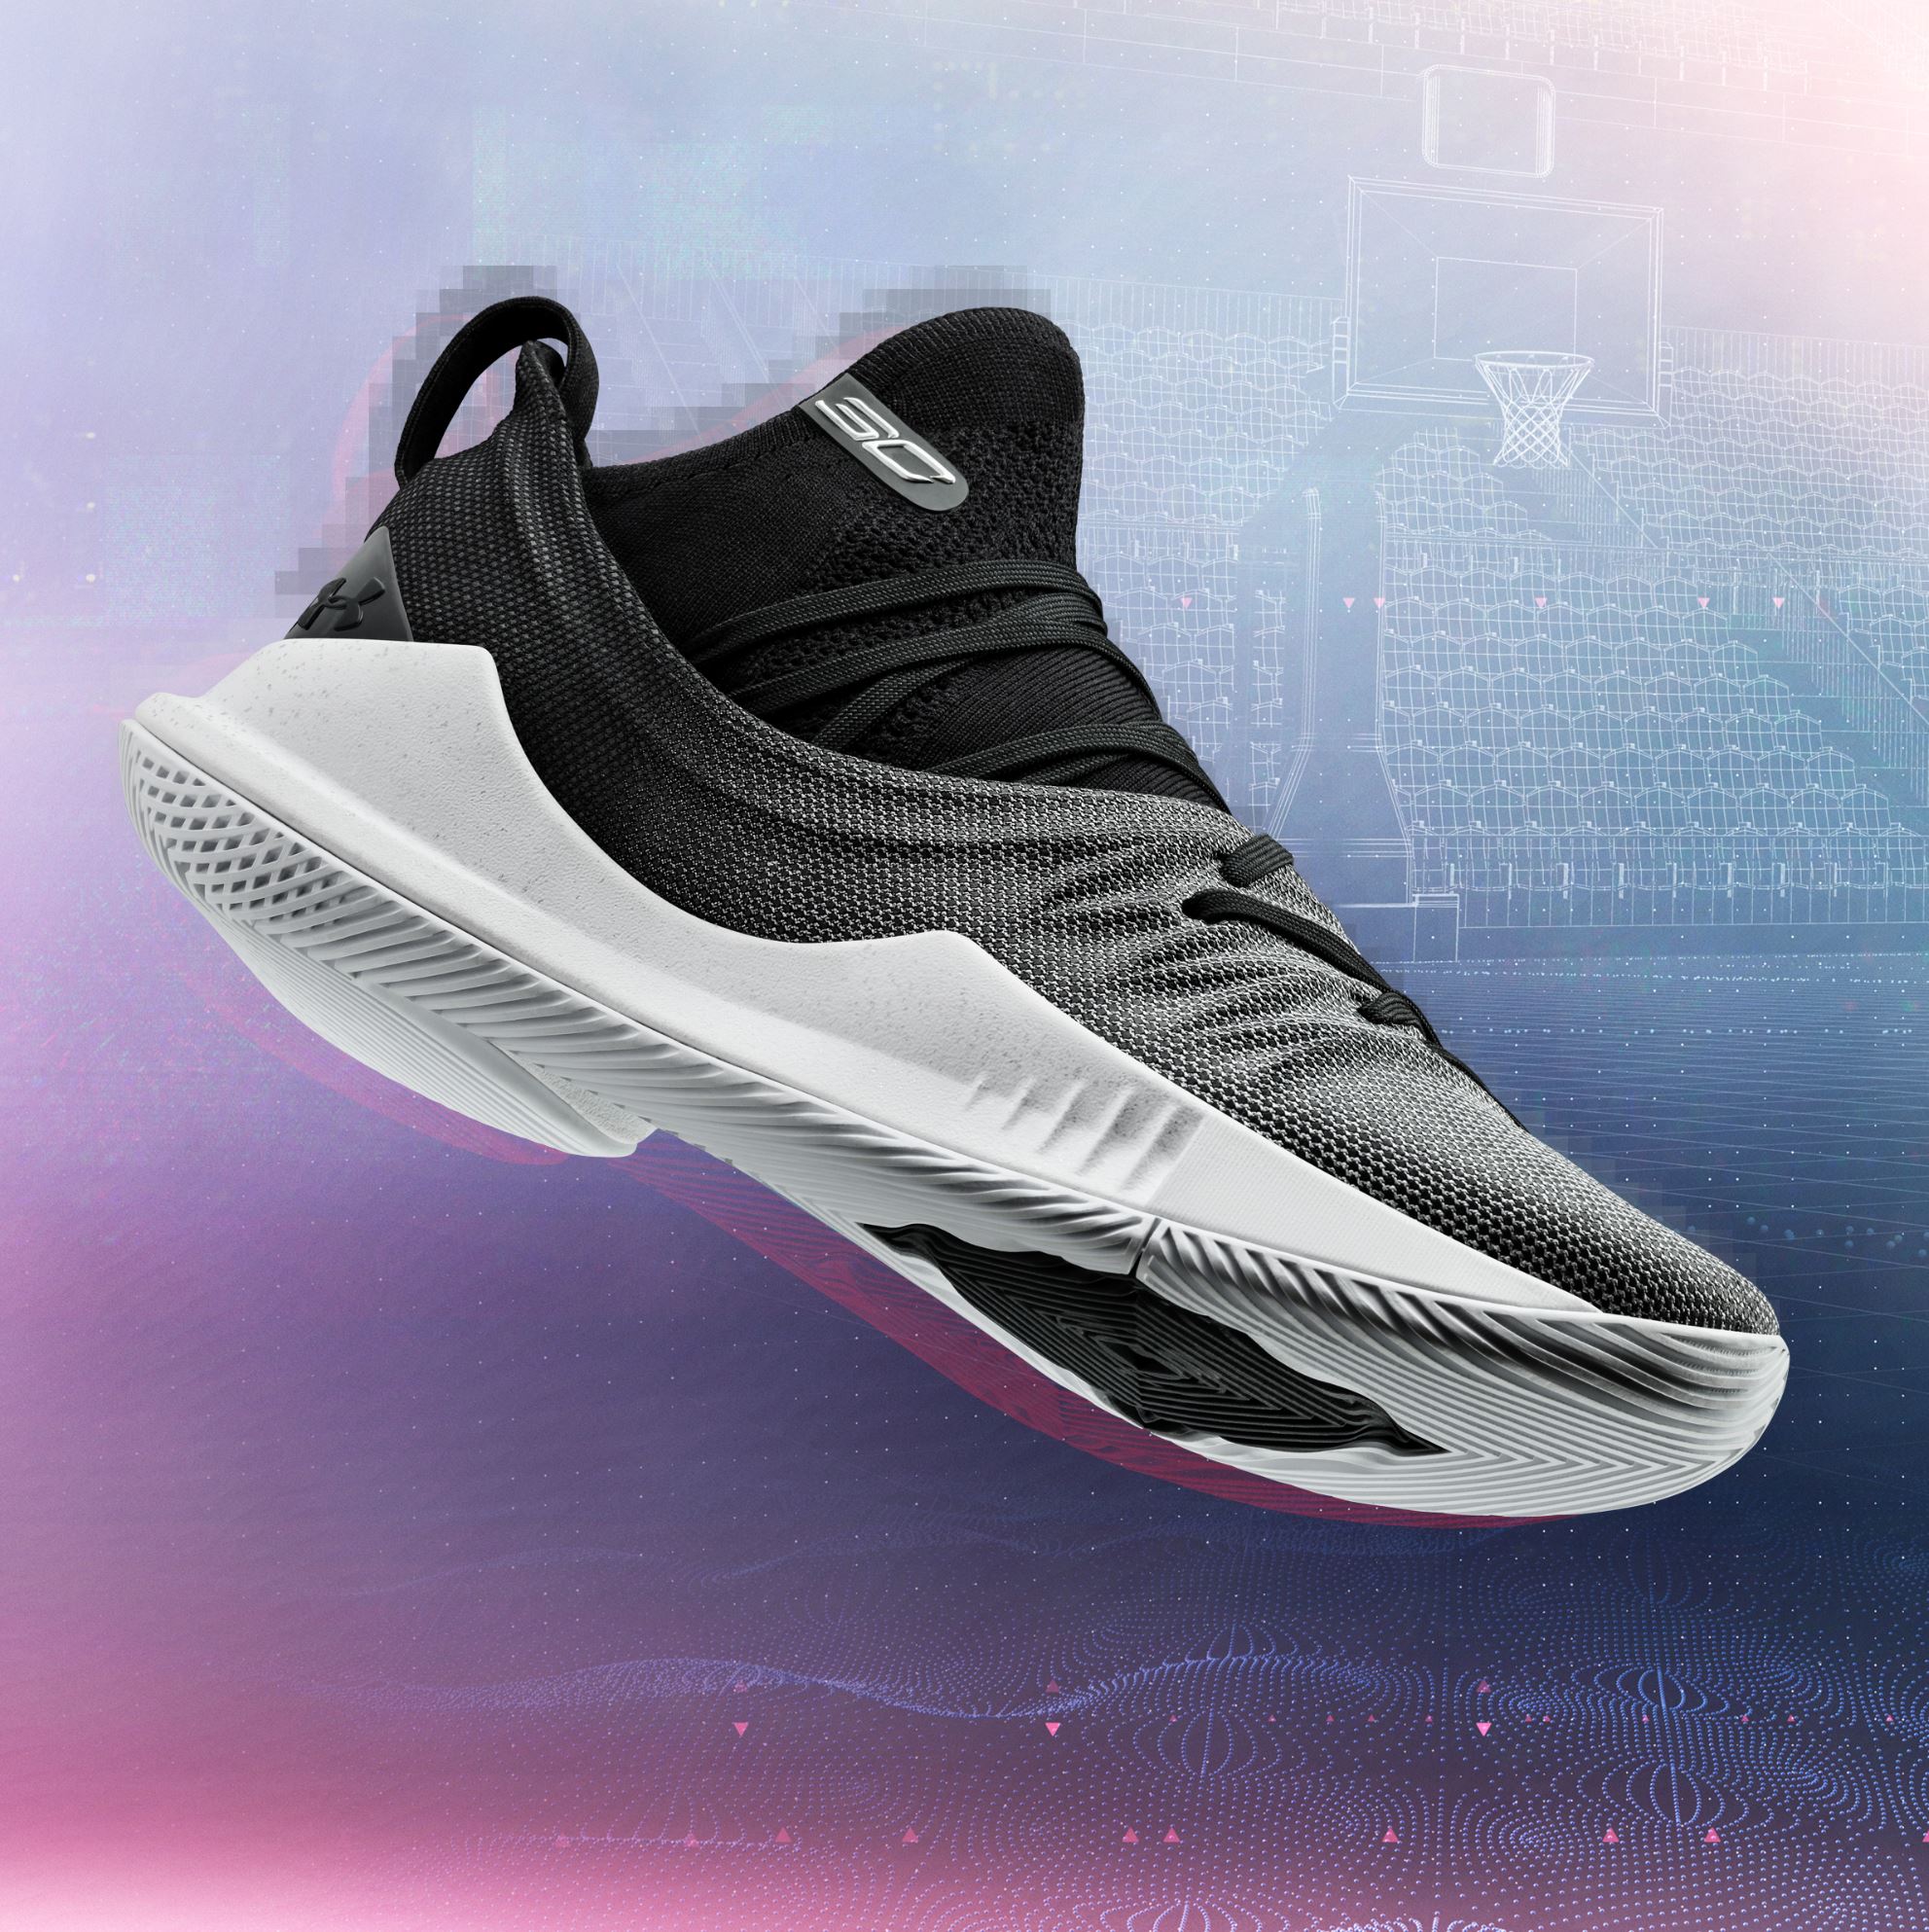 curry 5 shoes black